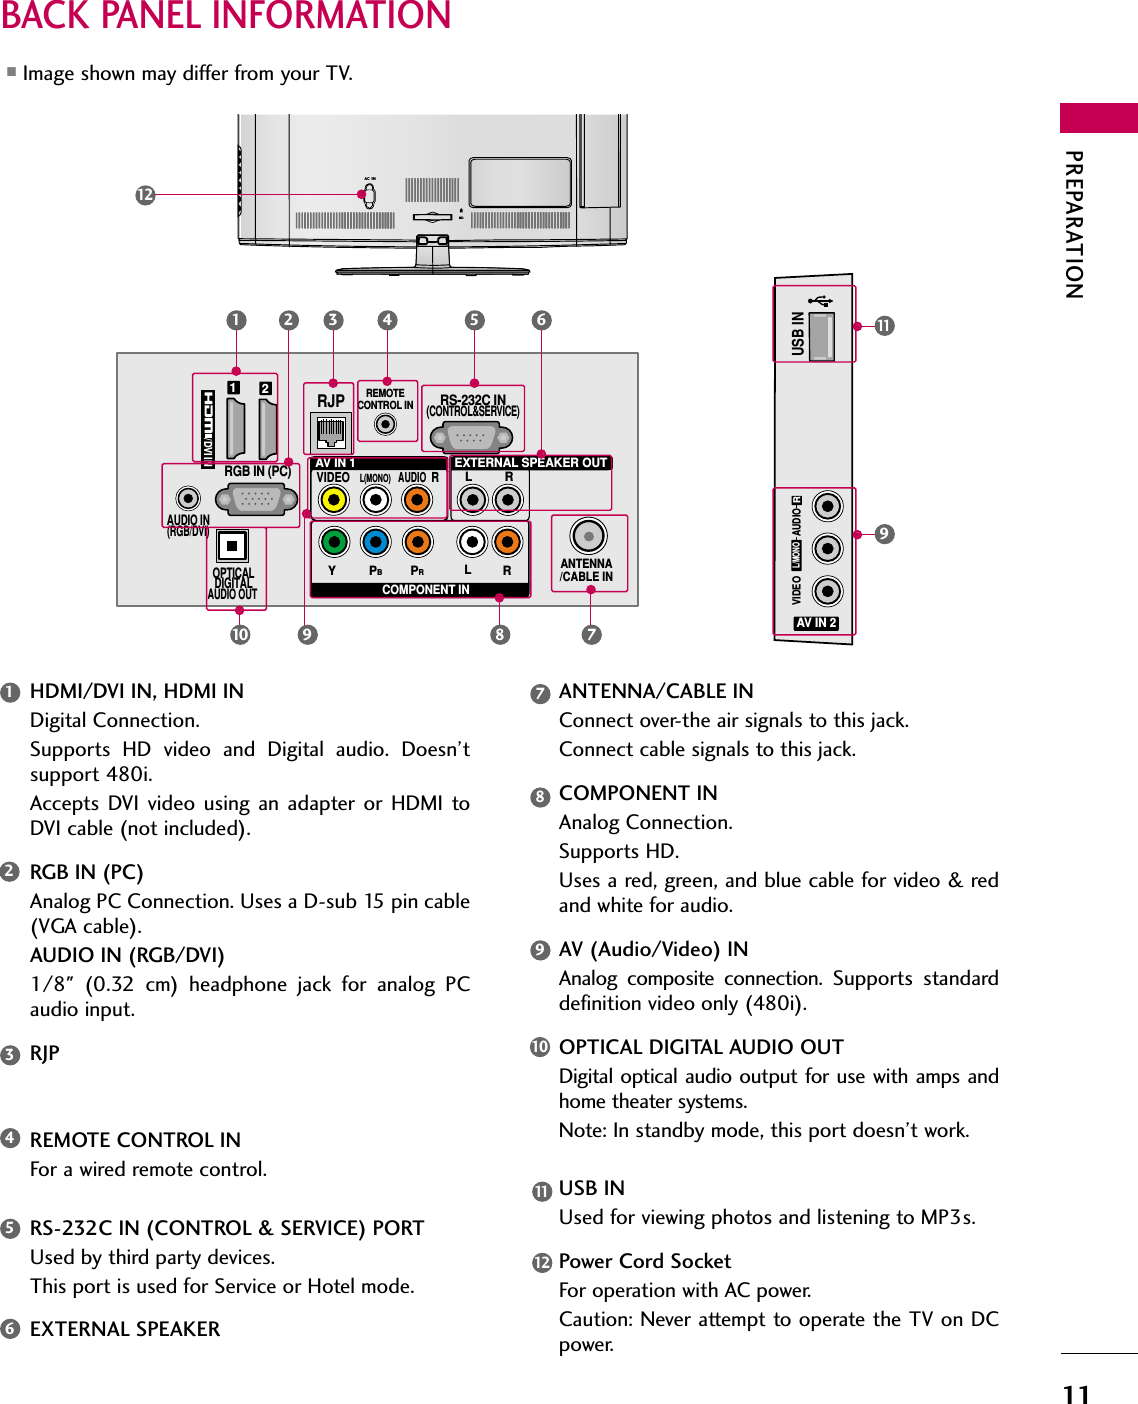 PREPARATION11BACK PANEL INFORMATION■Image shown may differ from your TV.AC  INVIDEOAUDIOL/MONORUSB INAV IN 21191RS-232C IN(CONTROL&amp;SERVICE)ANTENNA/CABLE INYPBPRLLRRRGB IN (PC)VIDEOAUDIORL(MONO)COMPONENT INOPTICALDIGITALAUDIO OUT AUDIO IN(RGB/DVI)/DVI IN2AV IN 1 EXTERNAL SPEAKER OUTRJPREMOTECONTROL IN1 5810 9 72 43 612HDMI/DVI IN, HDMI INDigital Connection. Supports HD video and Digital audio. Doesn’tsupport 480i. Accepts DVI video using an adapter or HDMI toDVI cable (not included).RGB IN (PC)Analog PC Connection. Uses a D-sub 15 pin cable(VGA cable).AUDIO IN (RGB/DVI)1/8&quot; (0.32 cm) headphone jack for analog PCaudio input.RJPREMOTE CONTROL INFor a wired remote control.RS-232C IN (CONTROL &amp; SERVICE) PORTUsed by third party devices.This port is used for Service or Hotel mode.EXTERNAL SPEAKERANTENNA/CABLE INConnect over-the air signals to this jack.Connect cable signals to this jack.COMPONENT INAnalog Connection. Supports HD. Uses a red, green, and blue cable for video &amp; redand white for audio.AV (Audio/Video) INAnalog composite connection. Supports standarddefinition video only (480i).OPTICAL DIGITAL AUDIO OUTDigital optical audio output for use with amps andhome theater systems. Note: In standby mode, this port doesn’t work.USB INUsed for viewing photos and listening to MP3s.Power Cord SocketFor operation with AC power. Caution: Never attempt to operate the TV on DCpower.123456987101112